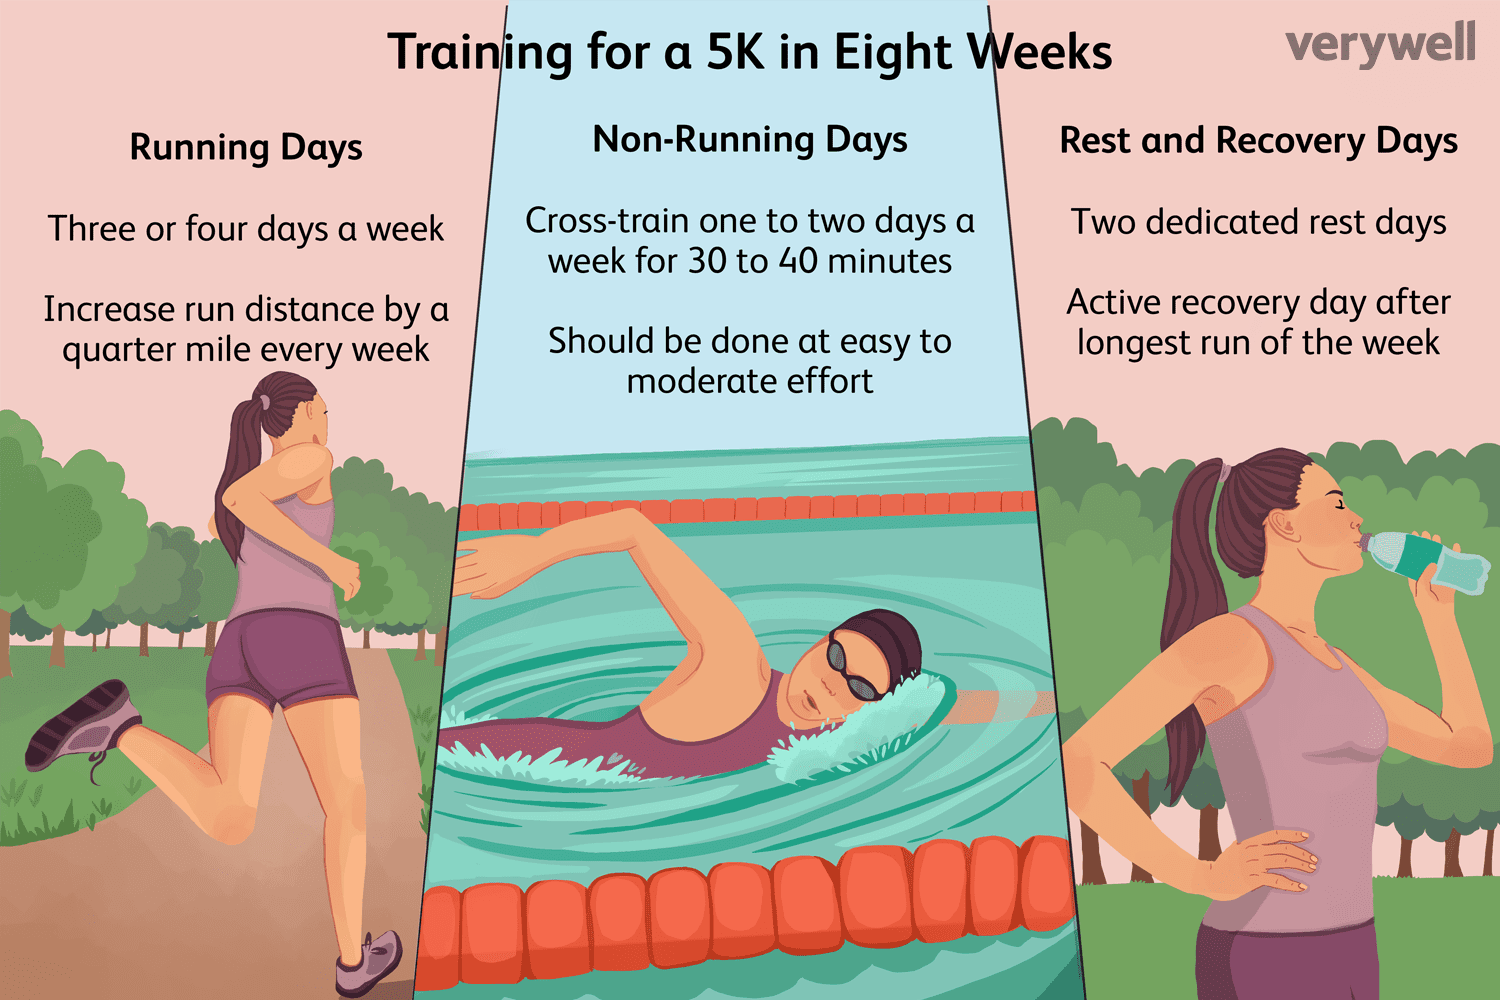 How to train for a 5K